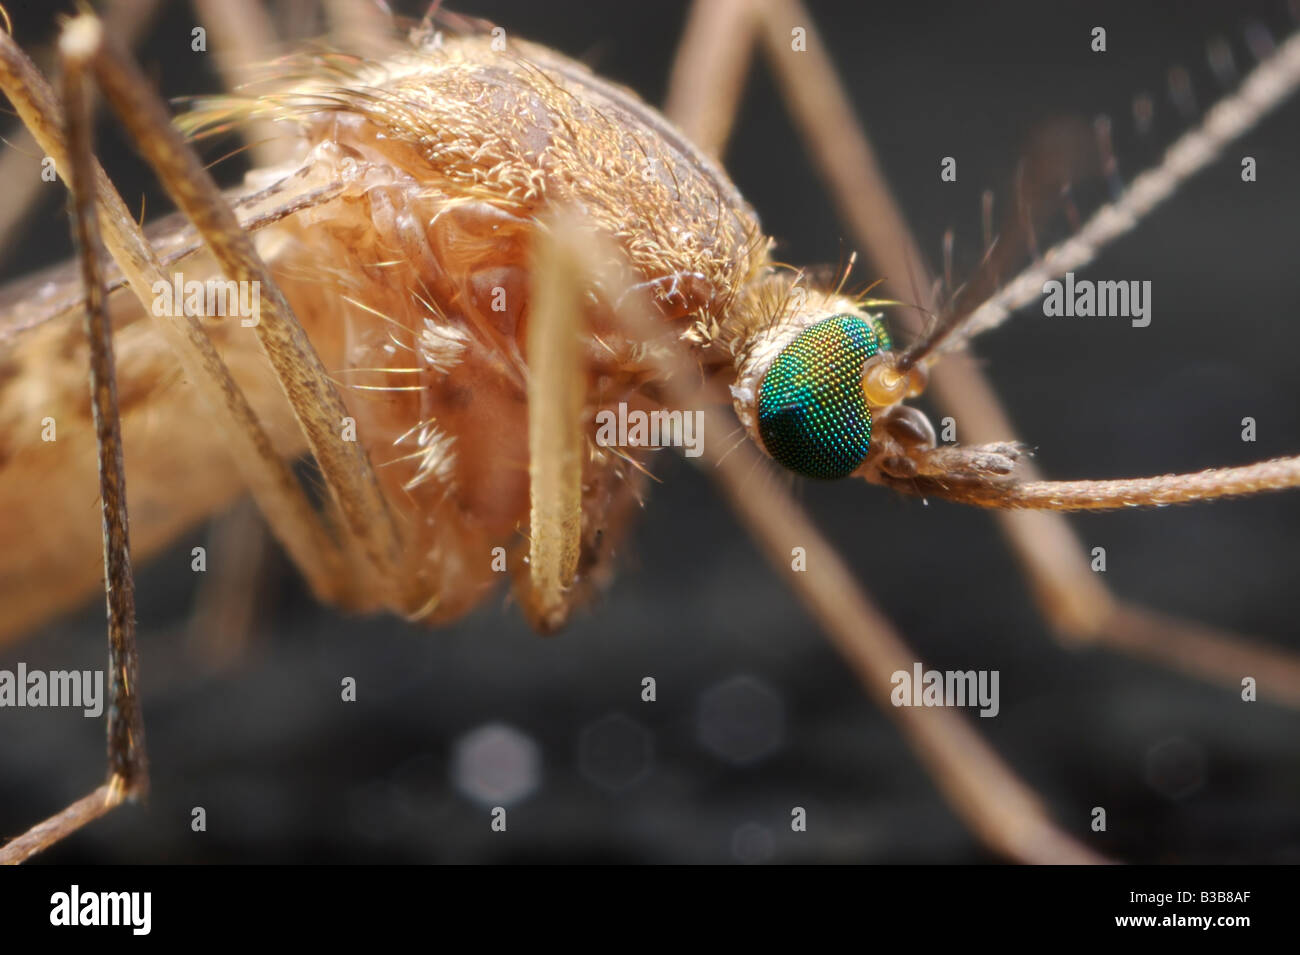 An extreme closeup of a mosquito at approximately 5 times life size. Stock Photo